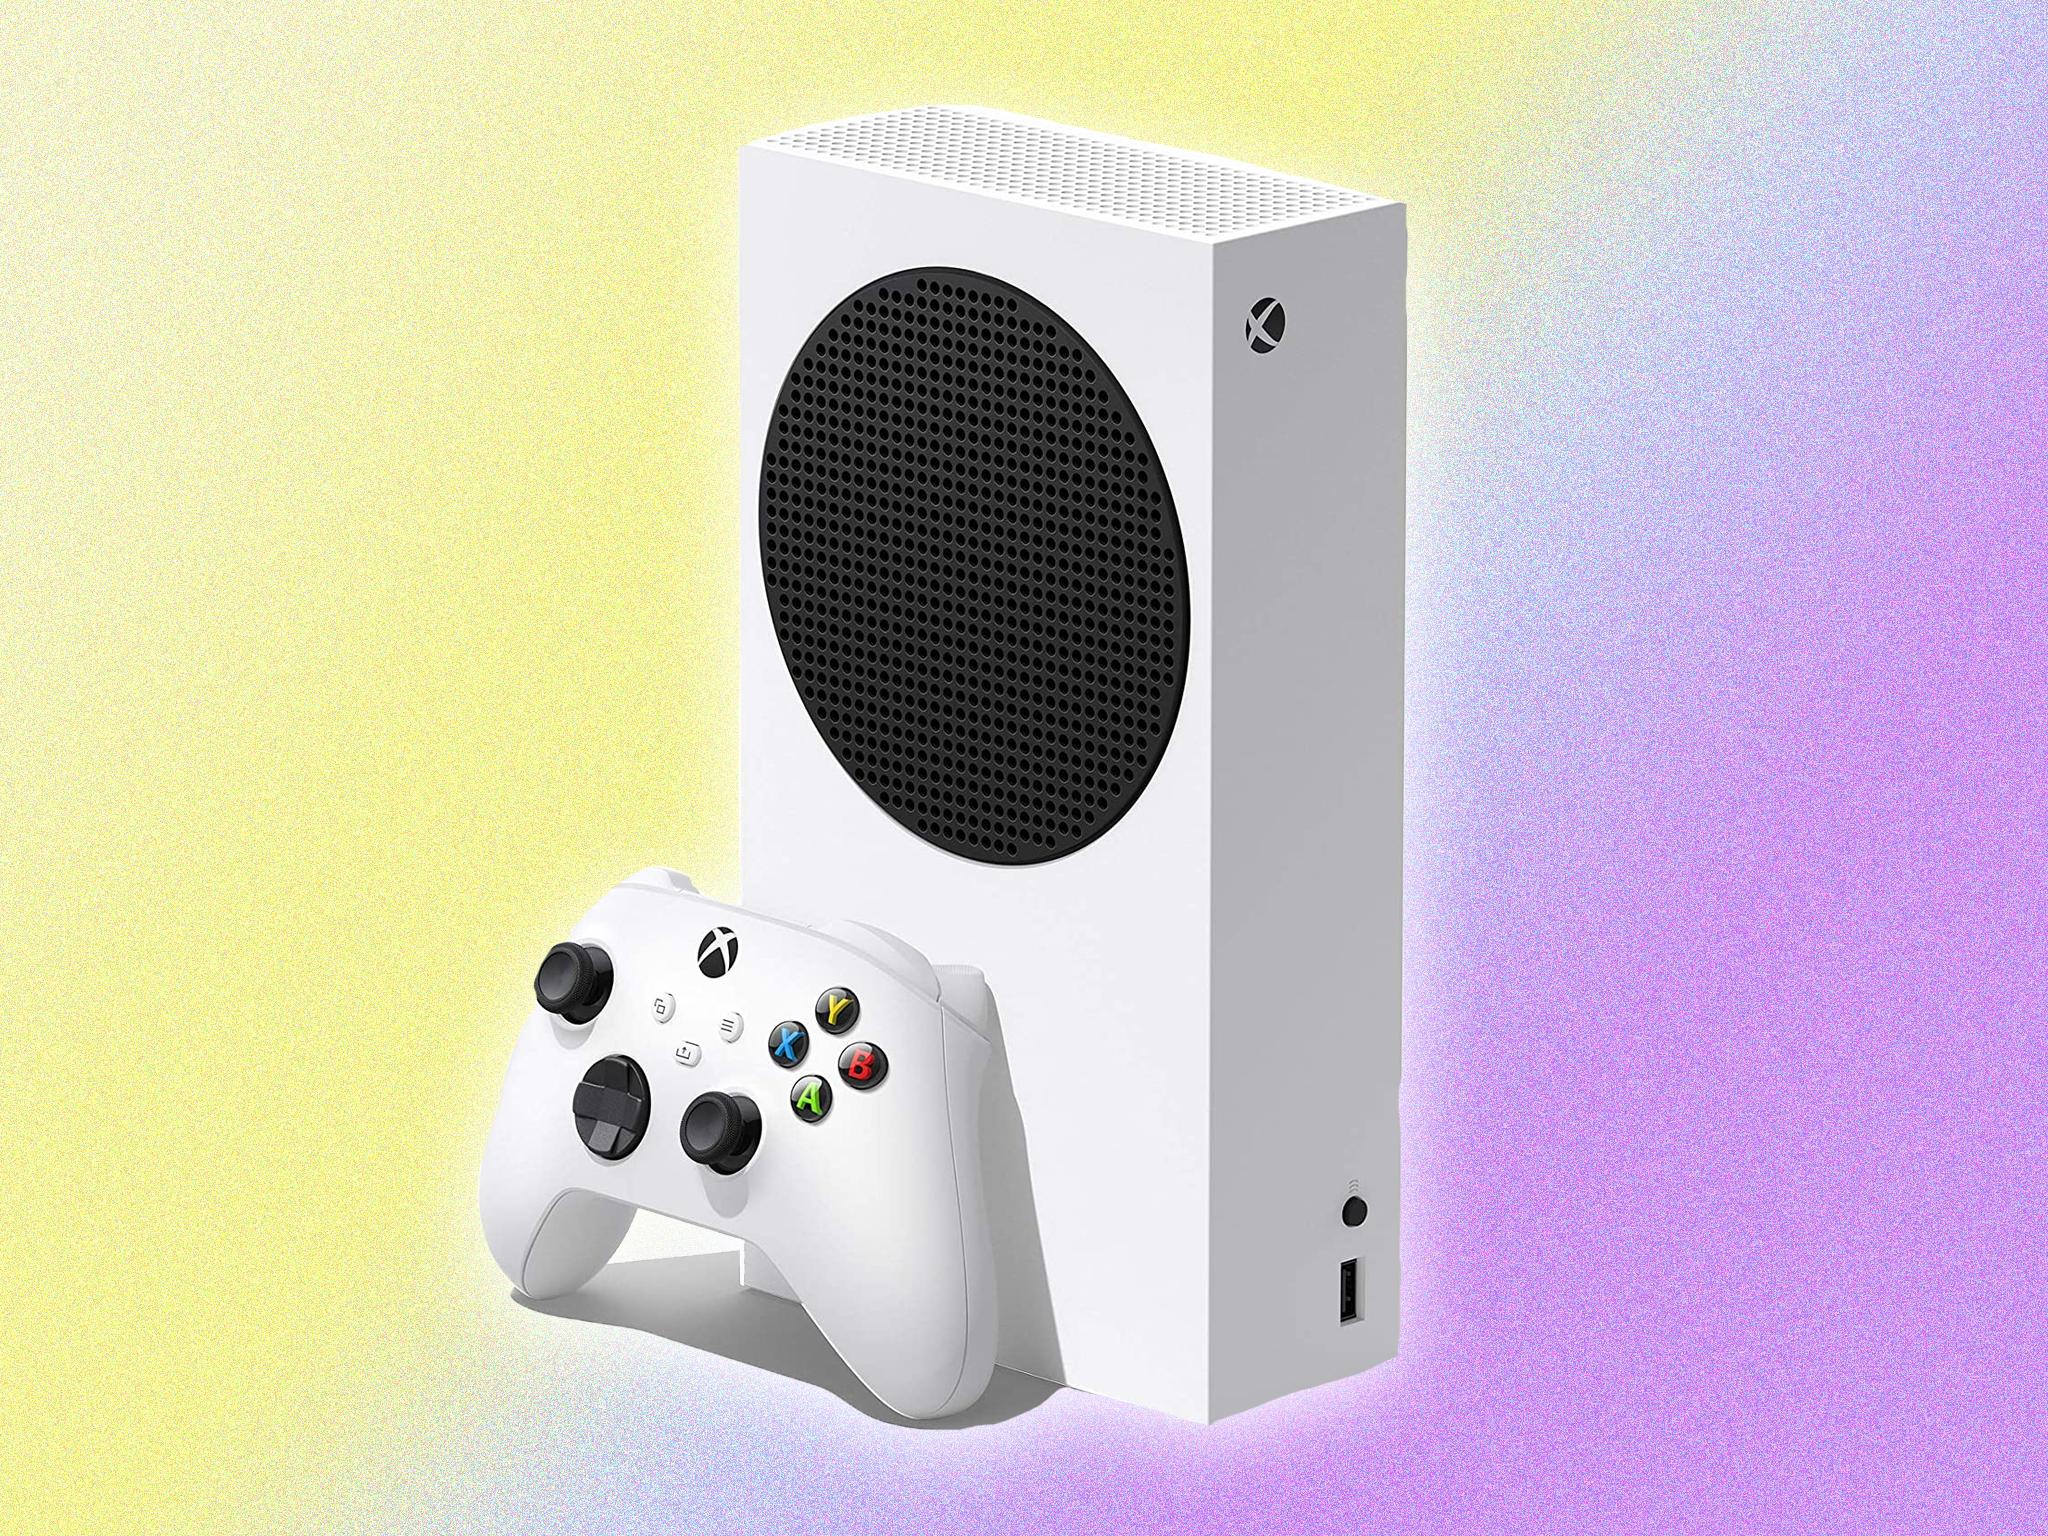 A tried and tested IndyBest buy, we included this Xbox in our best gaming consoles round-up